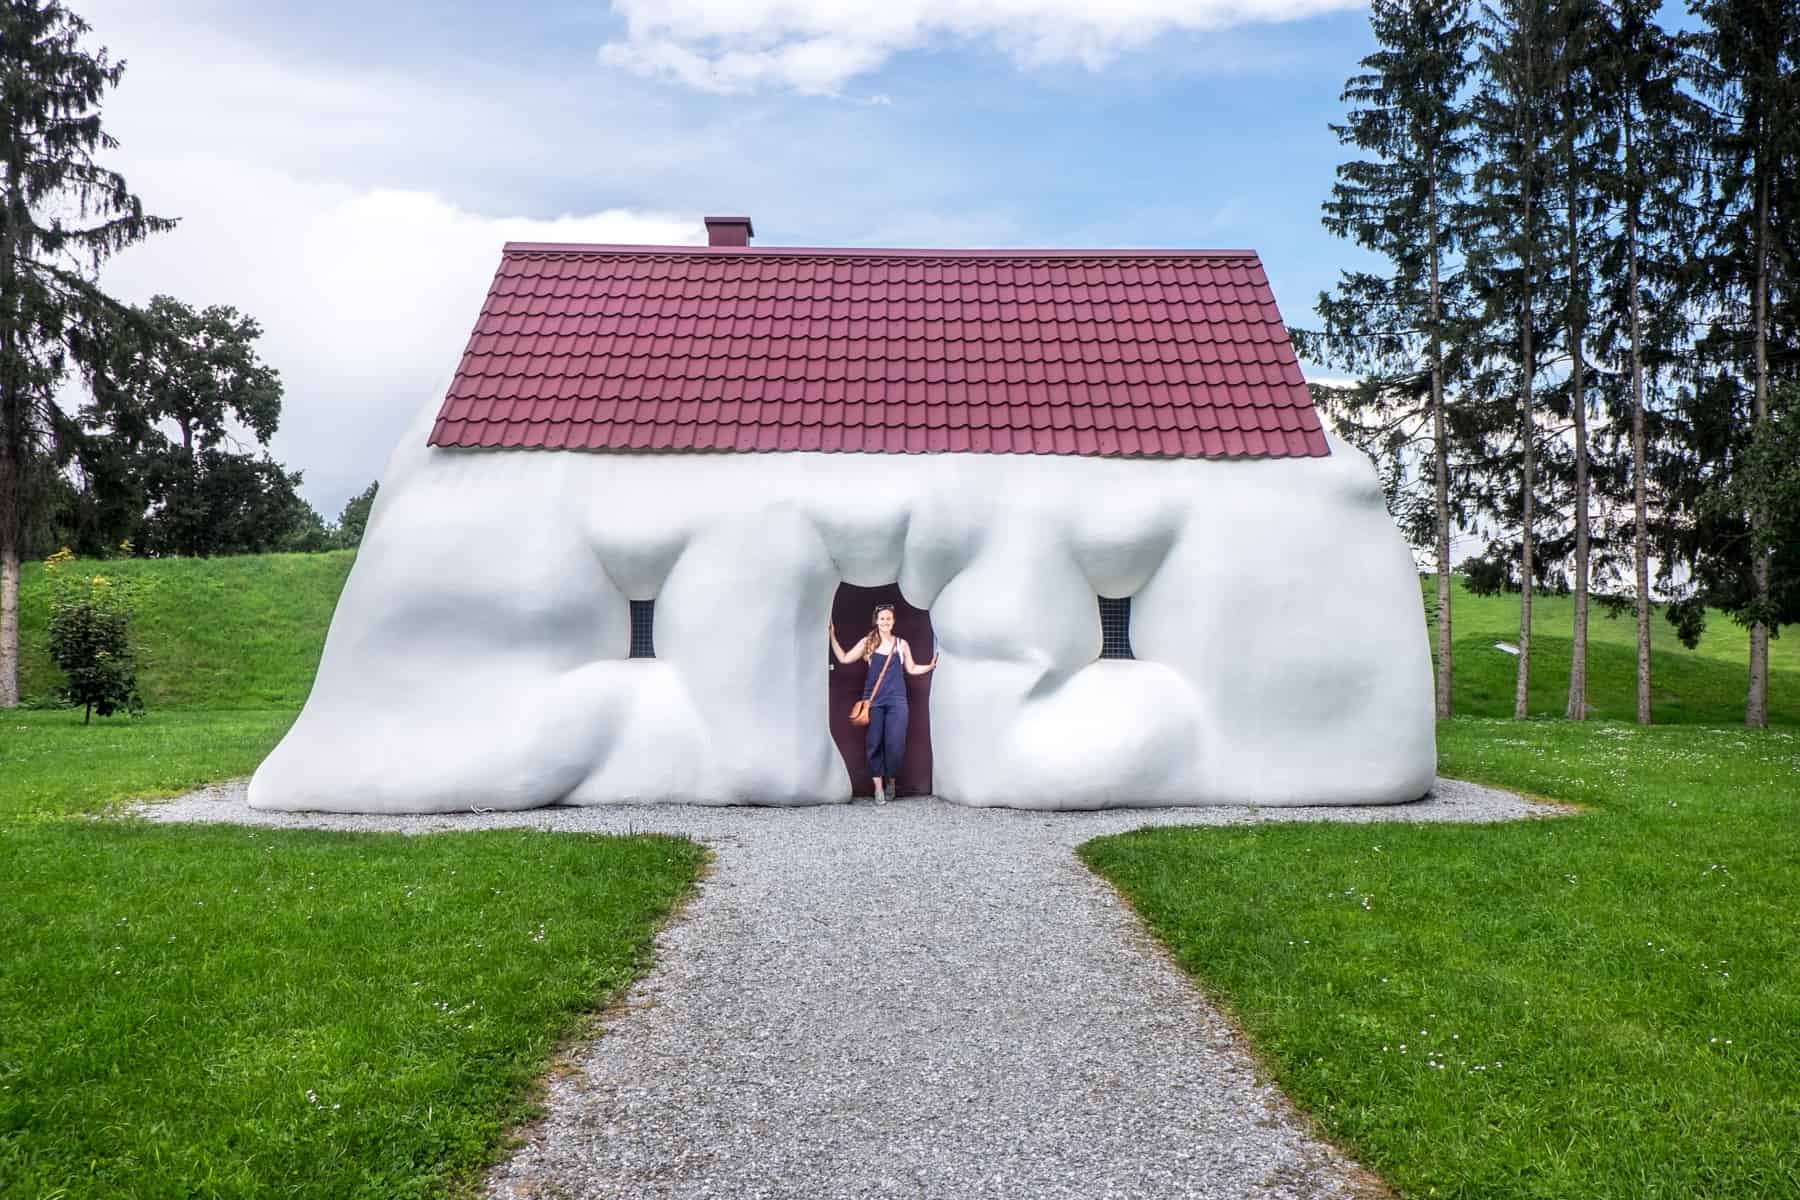 A woman stands in the doorway of the 'Fat House' artwork, a white house with a red roof that looks like its almost melting. Part of the Austrian Sculpture Park on a day trip from Graz